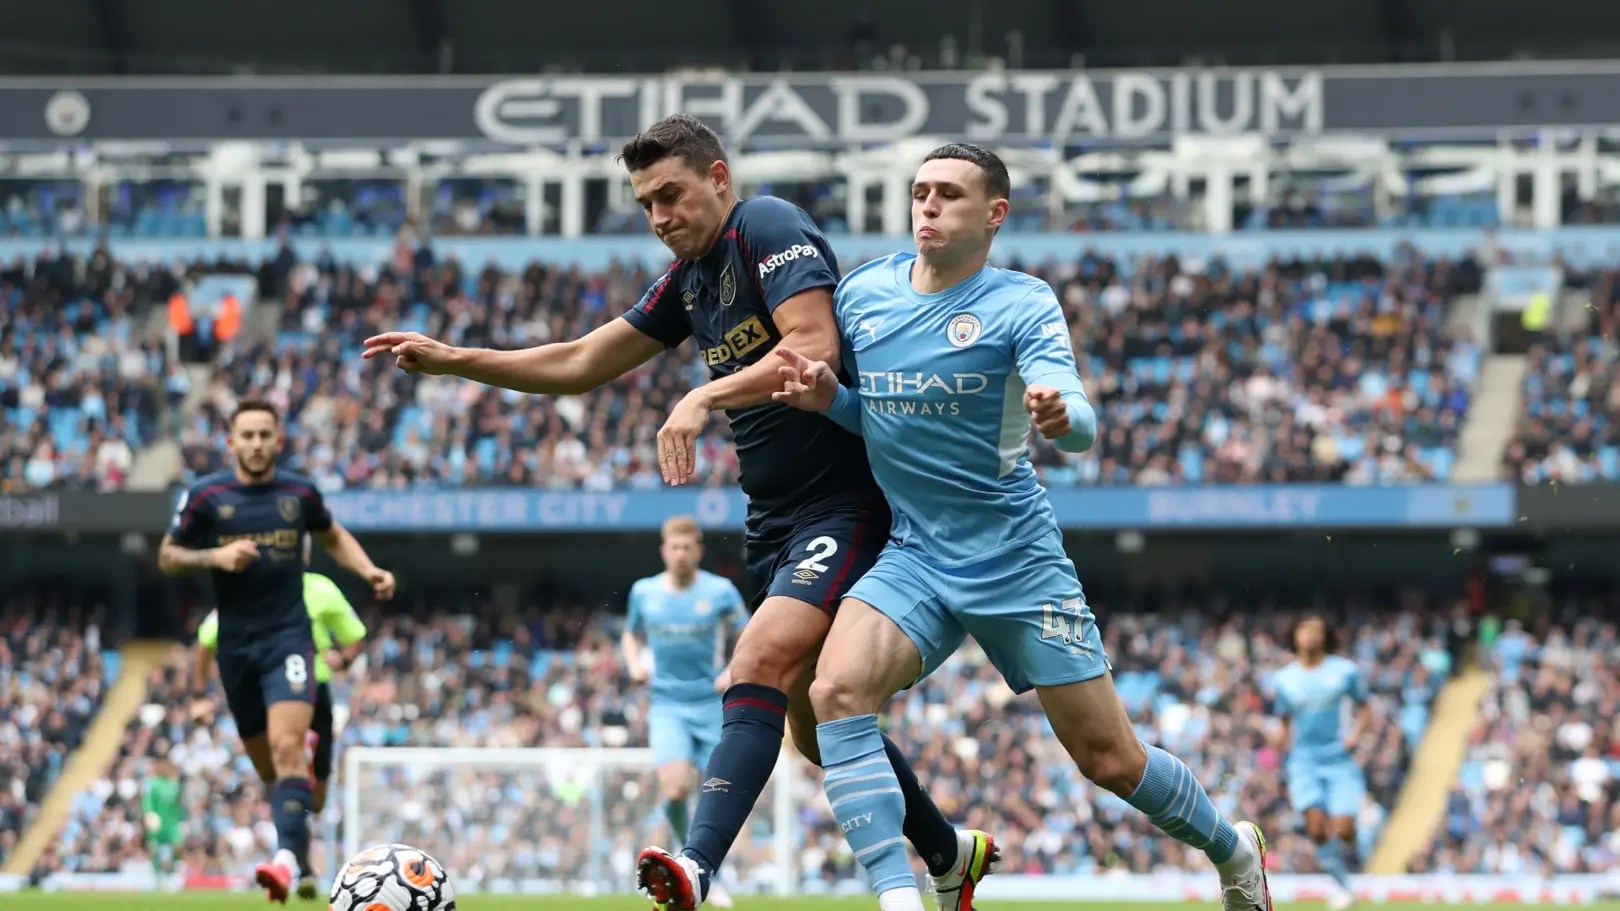 Burnley vs Manchester City Live: 19th place Burnley will hope to dent Man City's title defence; Get Latest Team News, Injuries and Suspensions, Predicted Lineups, Live Streaming